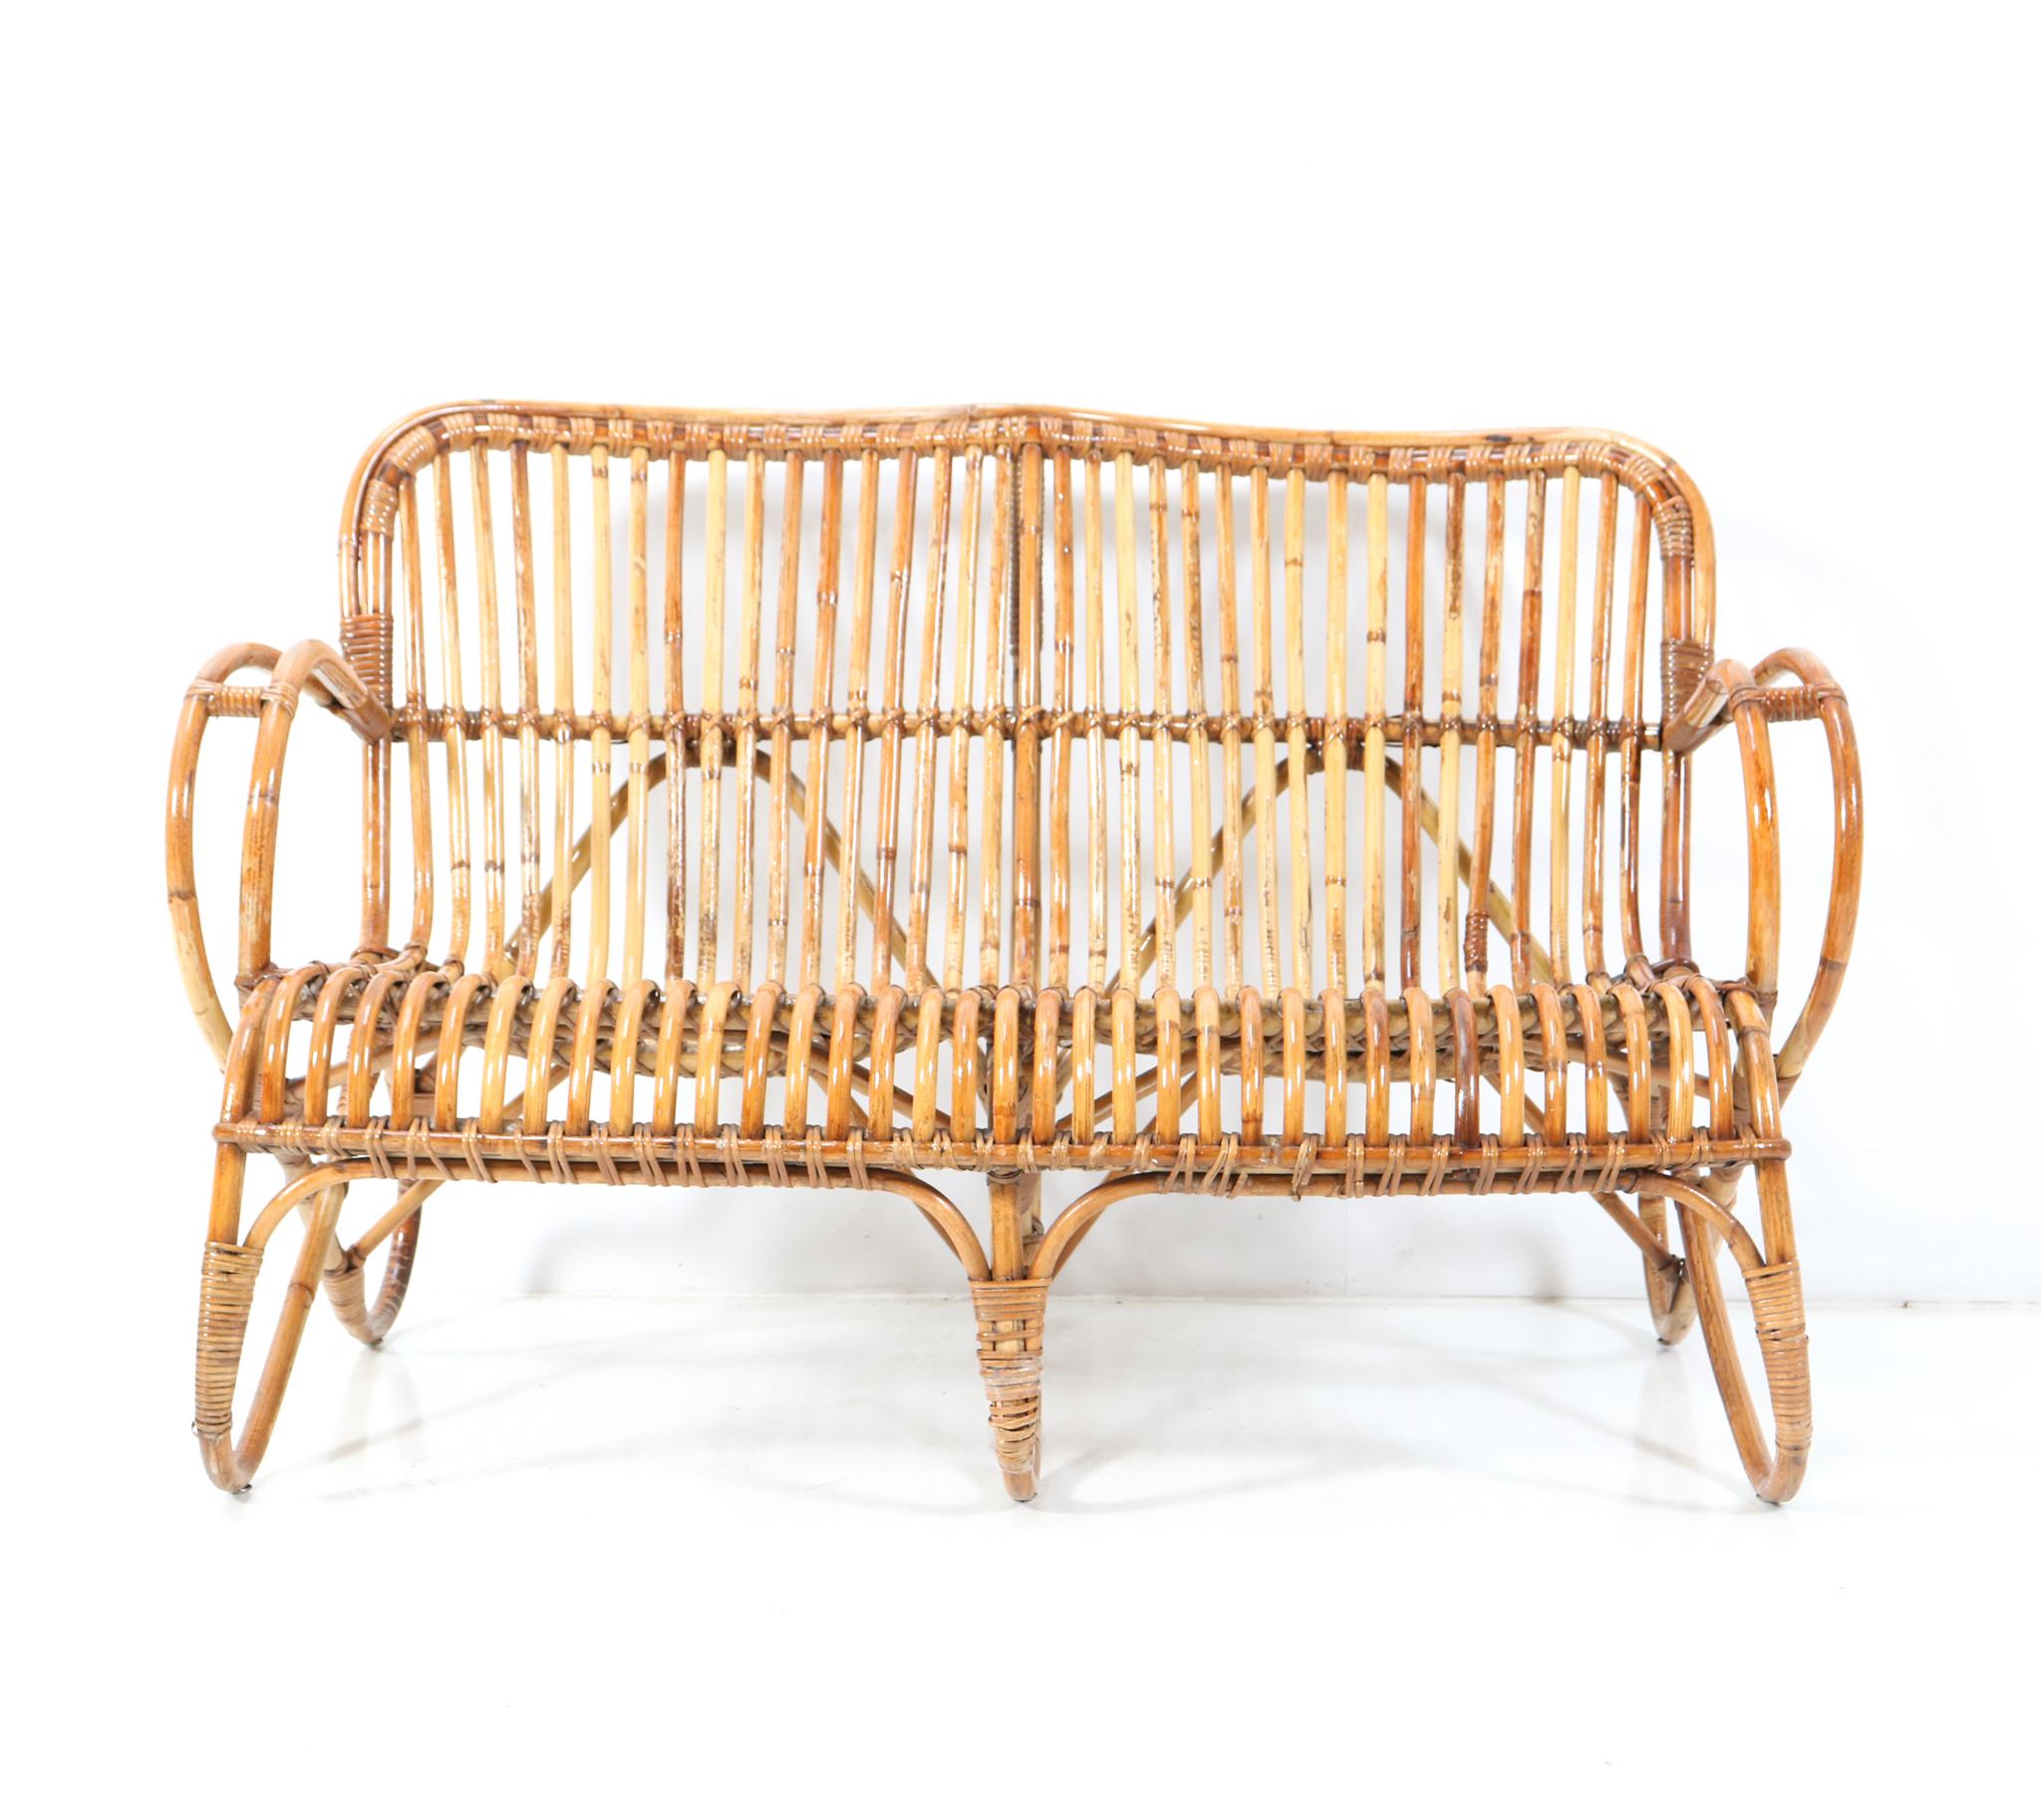 Dutch Vintage Mid-Century Modern Rattan and Bamboo Love Seat or Sofa by Rohe, 1960s